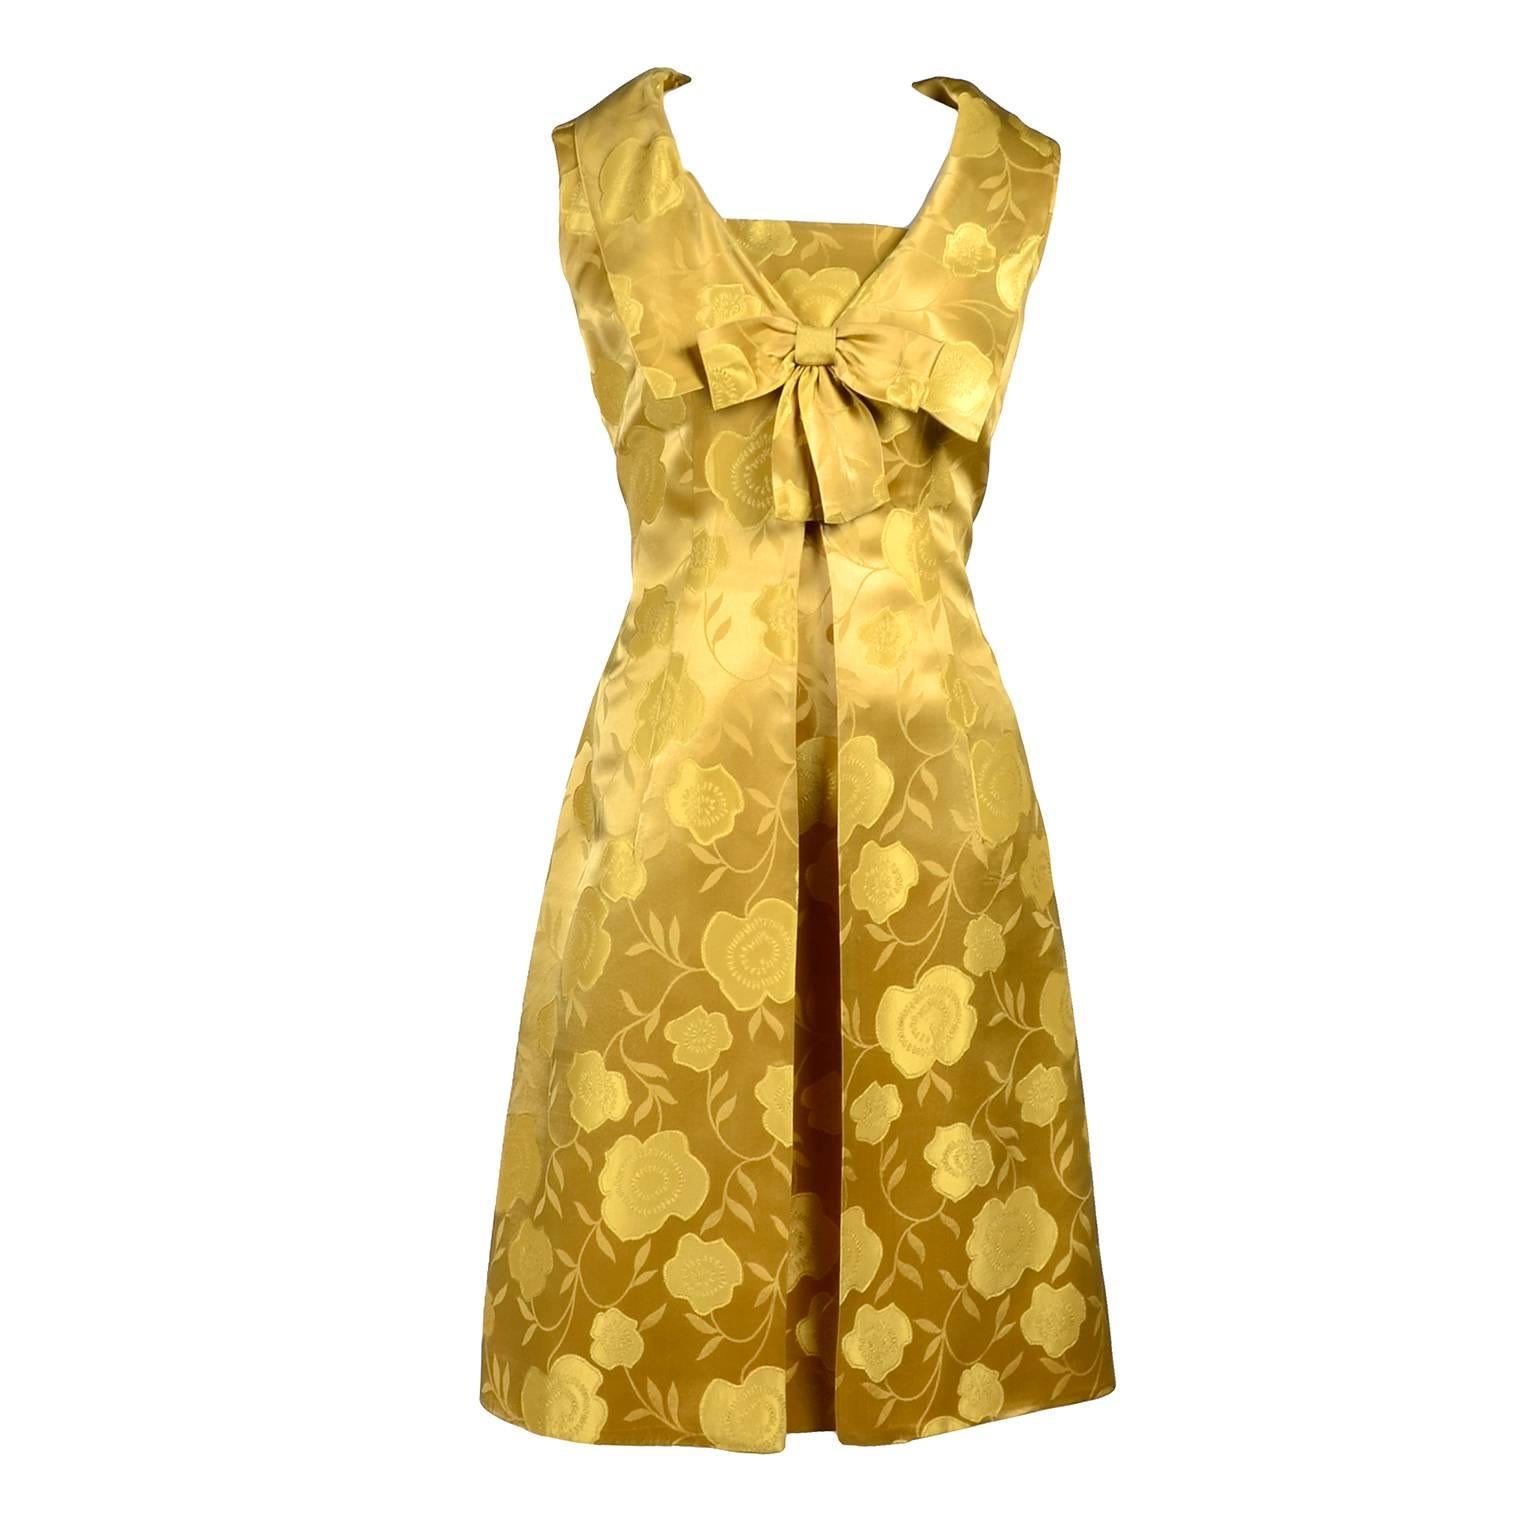 This is a pretty gold floral satin 2 piece vintage cocktail dress ensemble that includes a spaghetti strap dress with a matching sleeveless long jacket. The jacket or sleeveless overdress secures with a snap and hook and eye at the bust under the